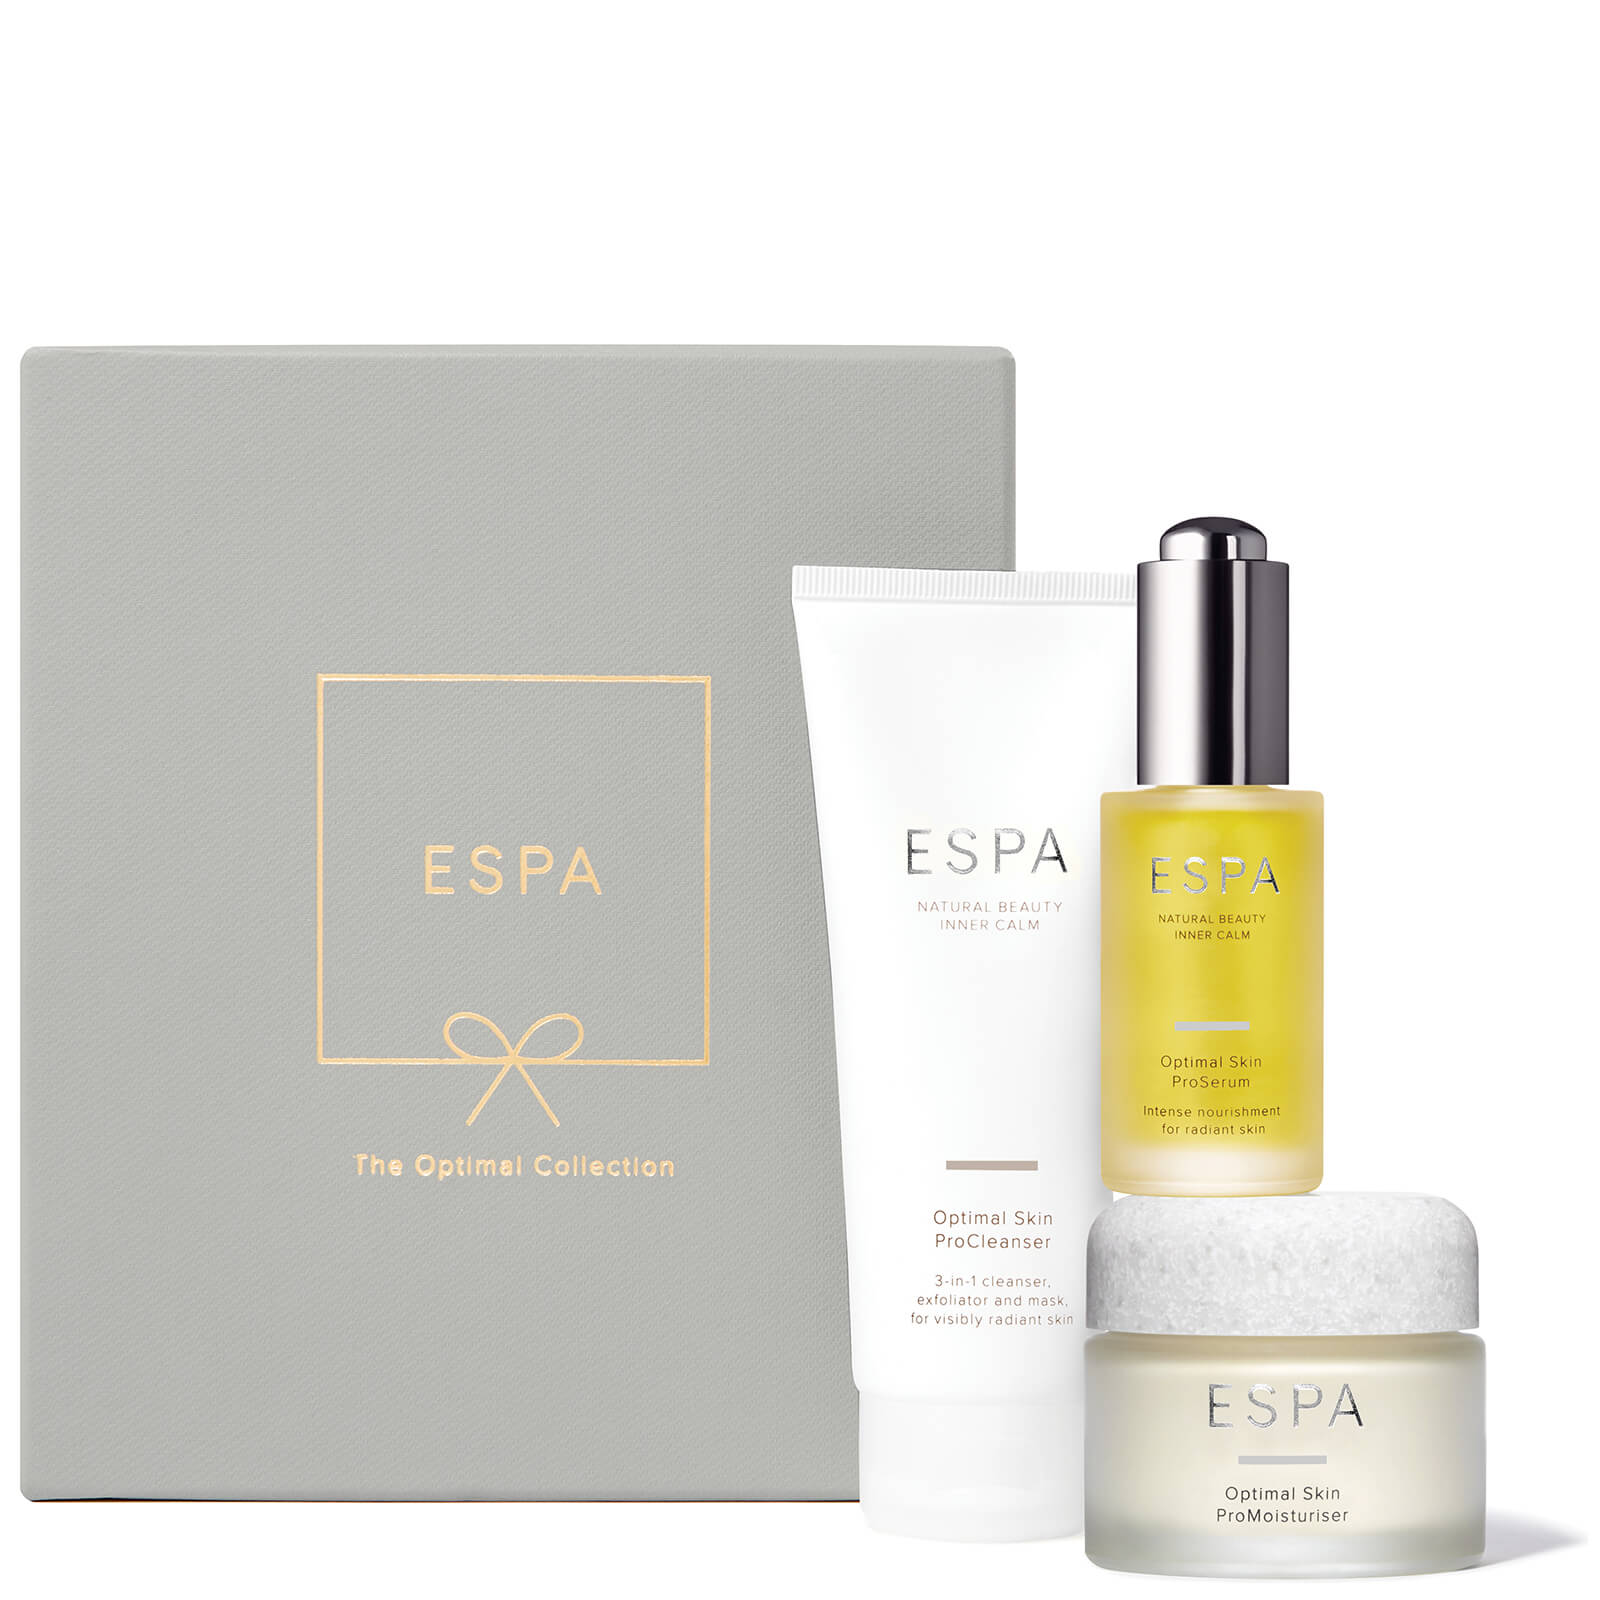 ESPA The Optimal Collection (Worth €182.00)